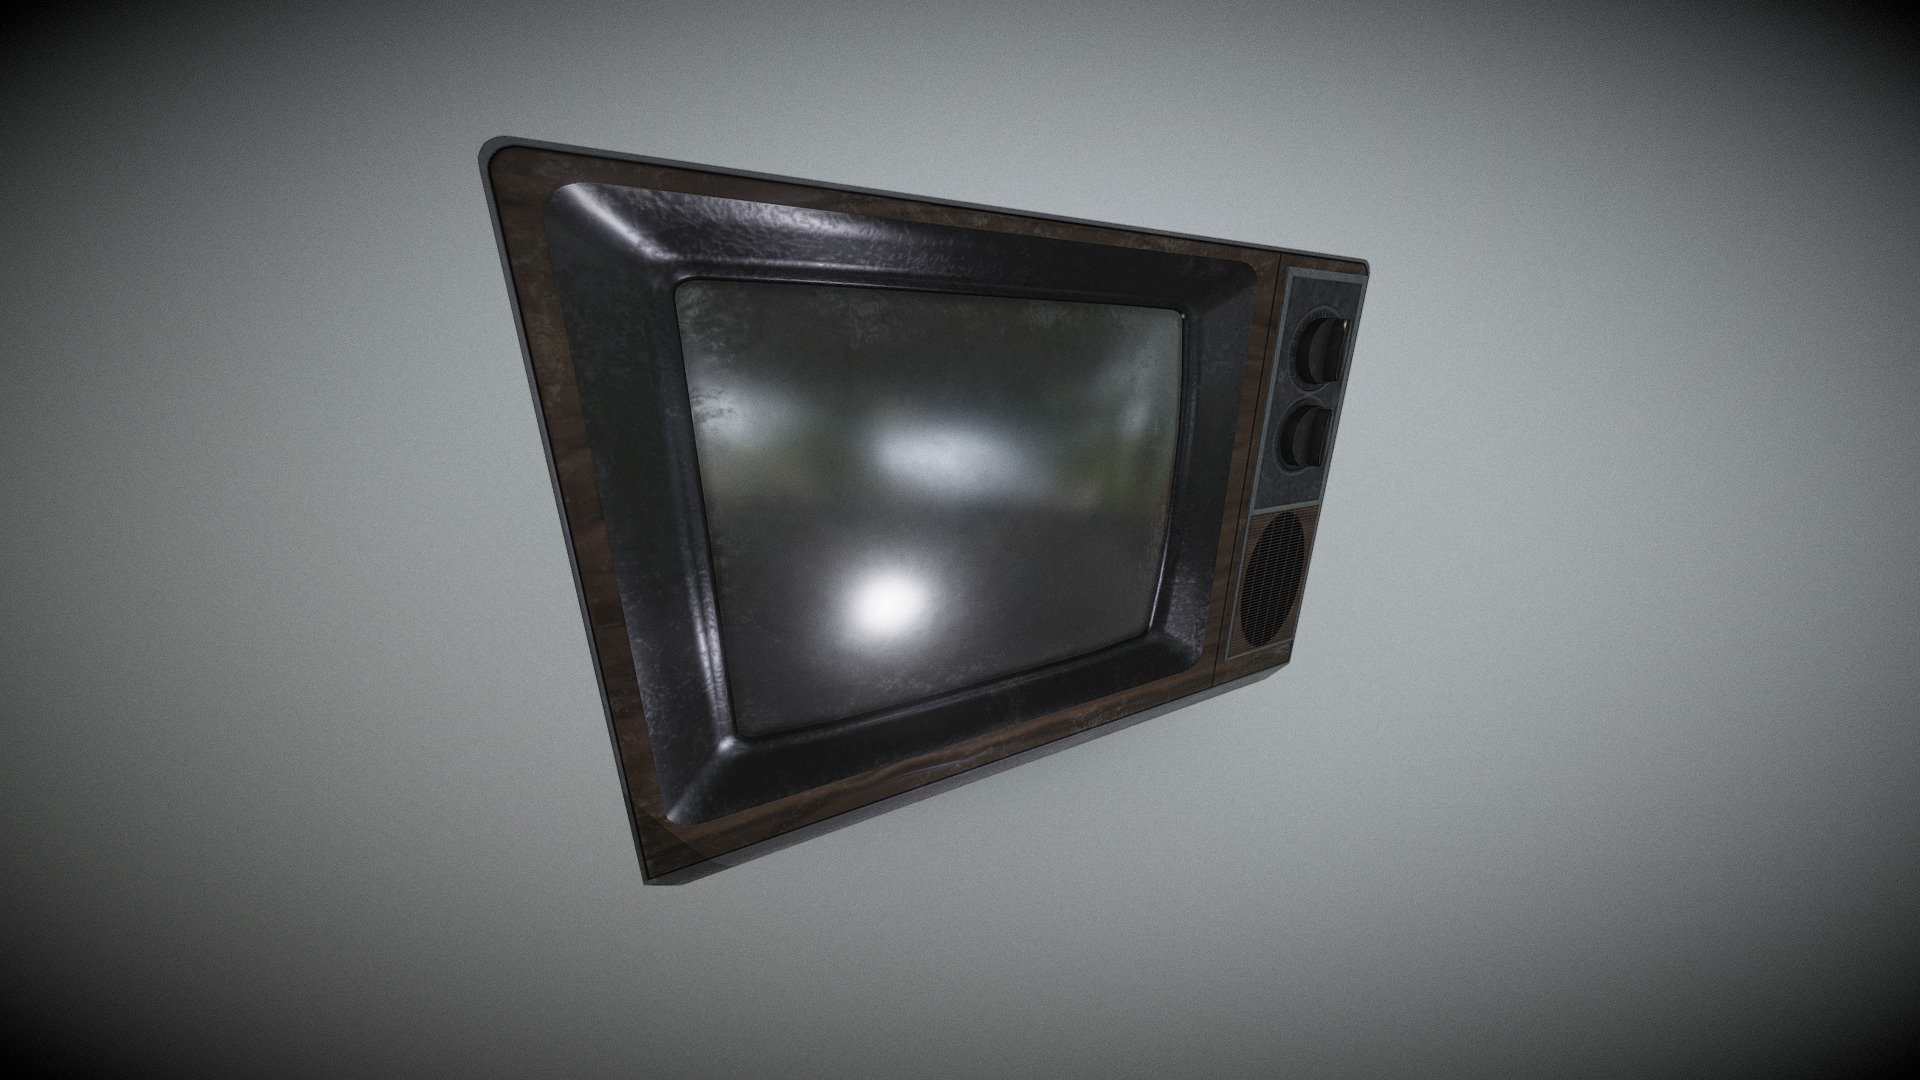 Old deteriorated TV